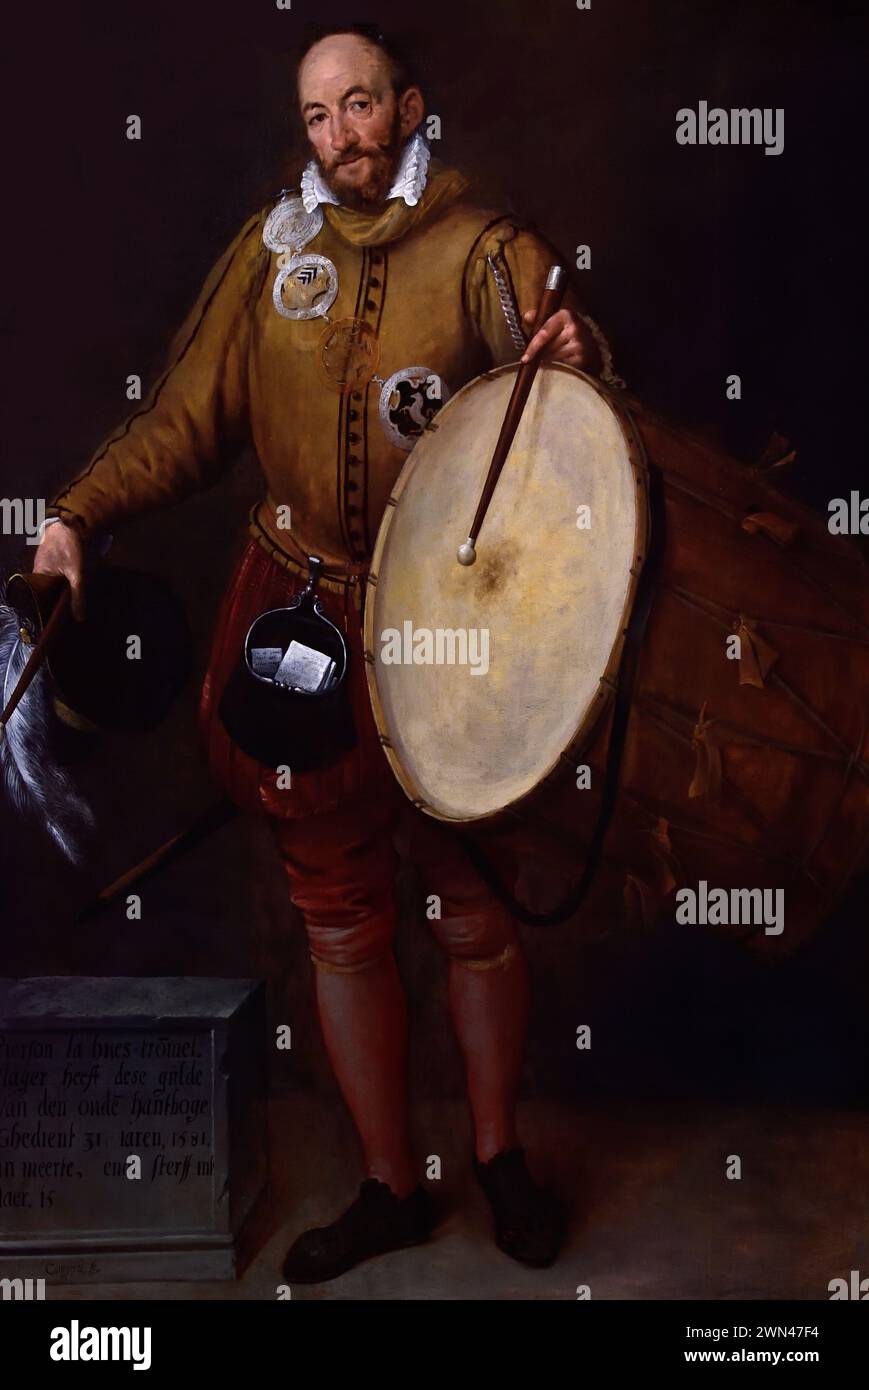 Pierson la Hues, Drummer and Page of the Old Archers' Guild Gillis Coignet i 1542-1599 Royal Museum of fine Arts, Anversa, Belgio, Belgio. Foto Stock